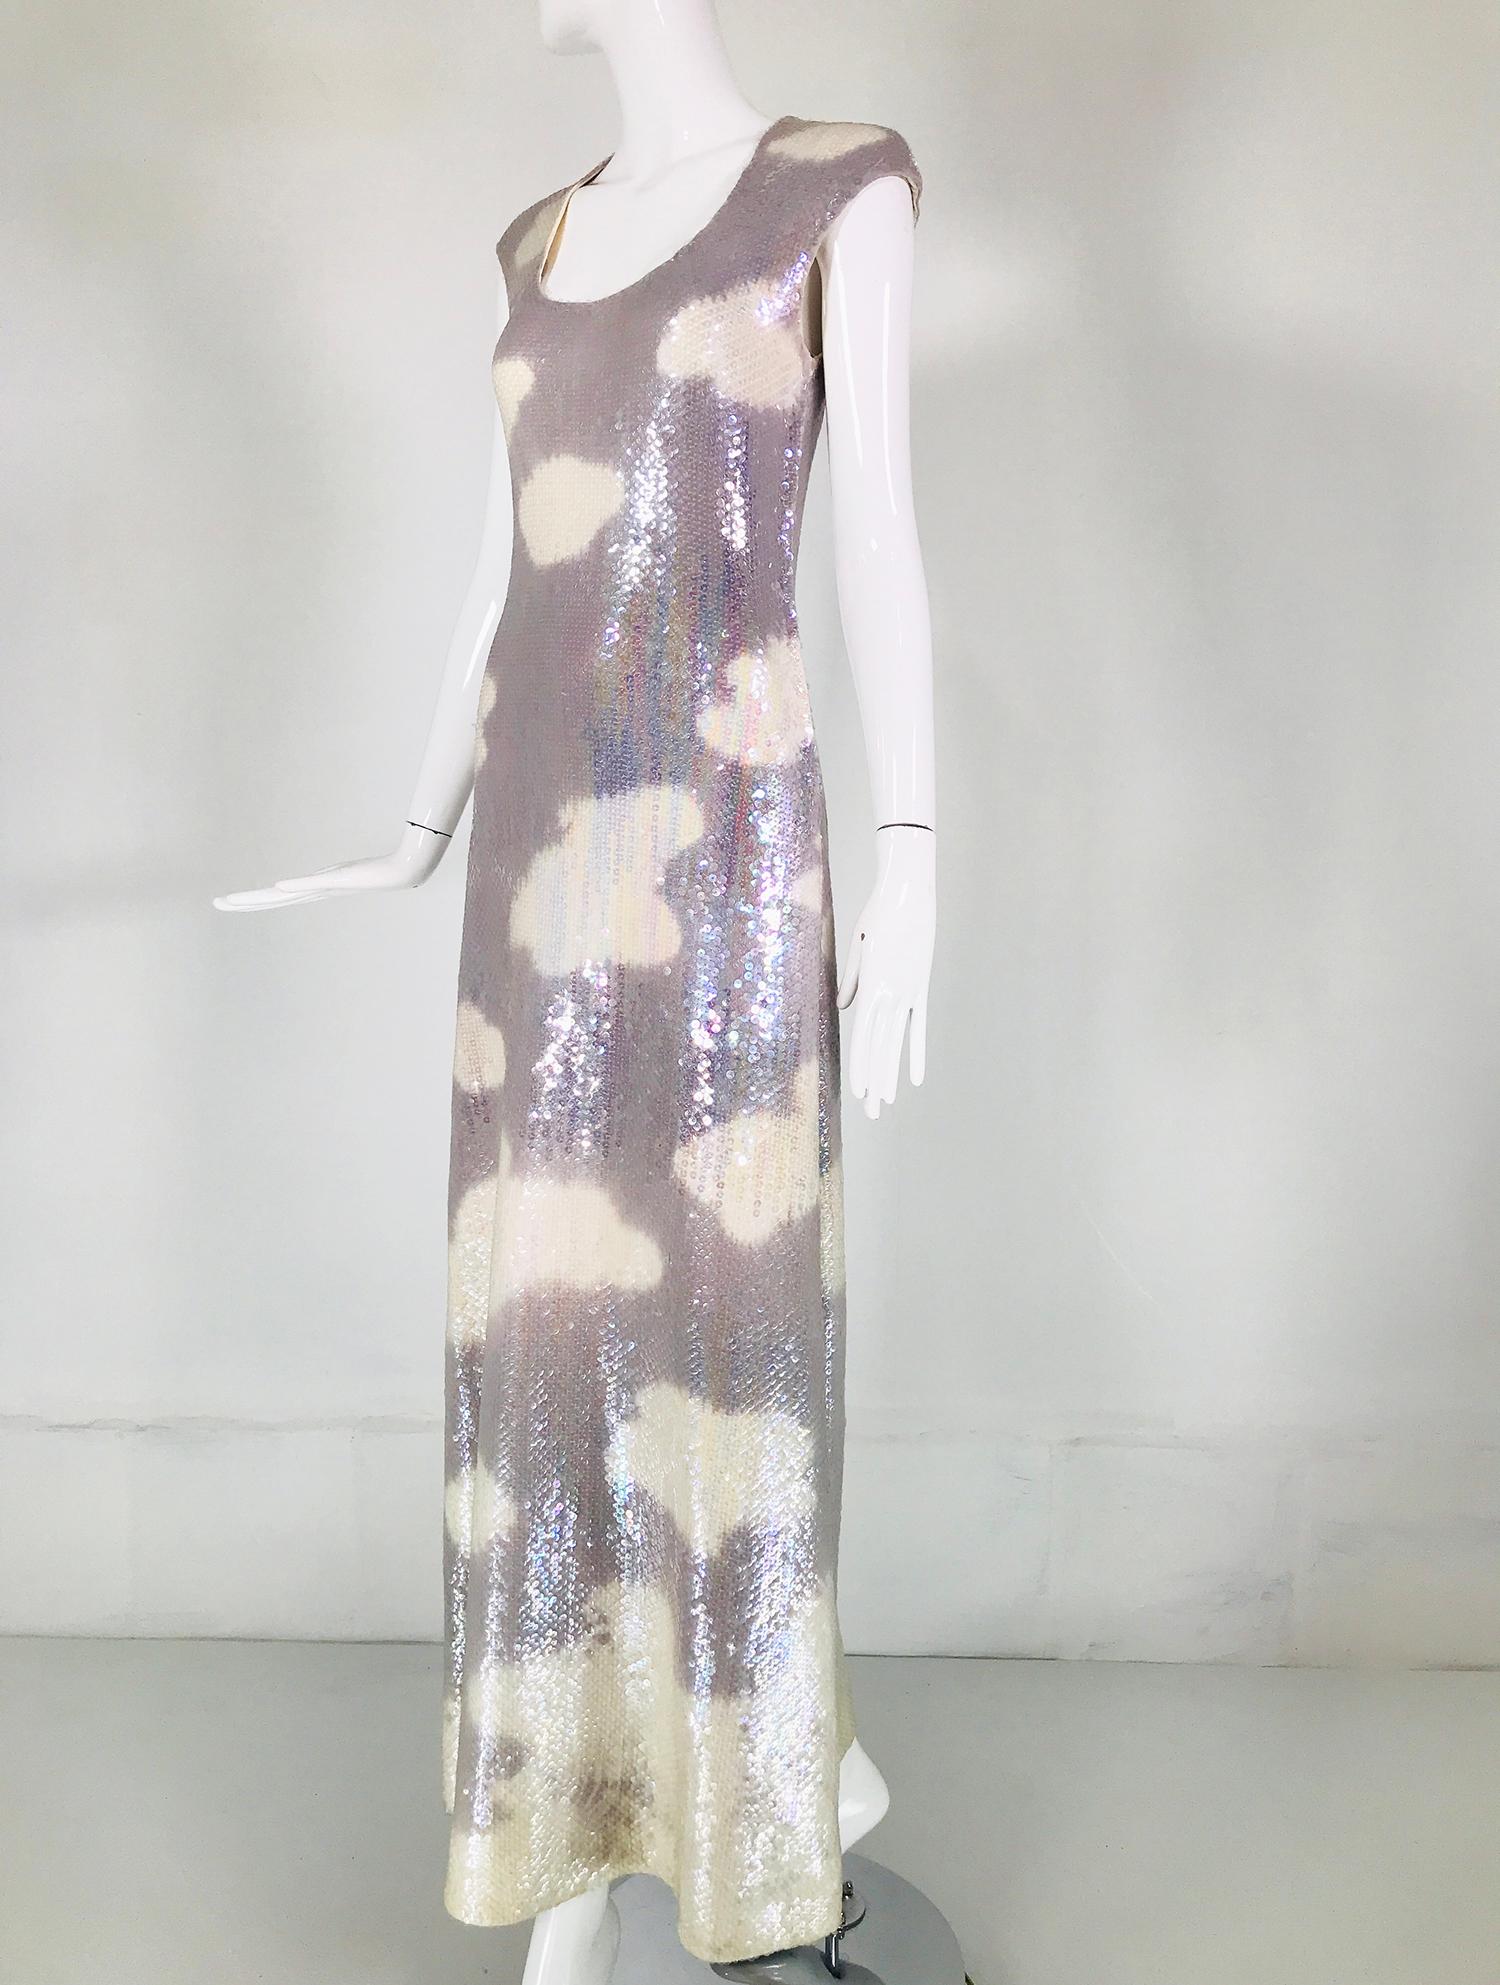 Halston Iconic Clouds Dress in Stormy Grey & Cream Iridescent Sequins Mid 1970s 8